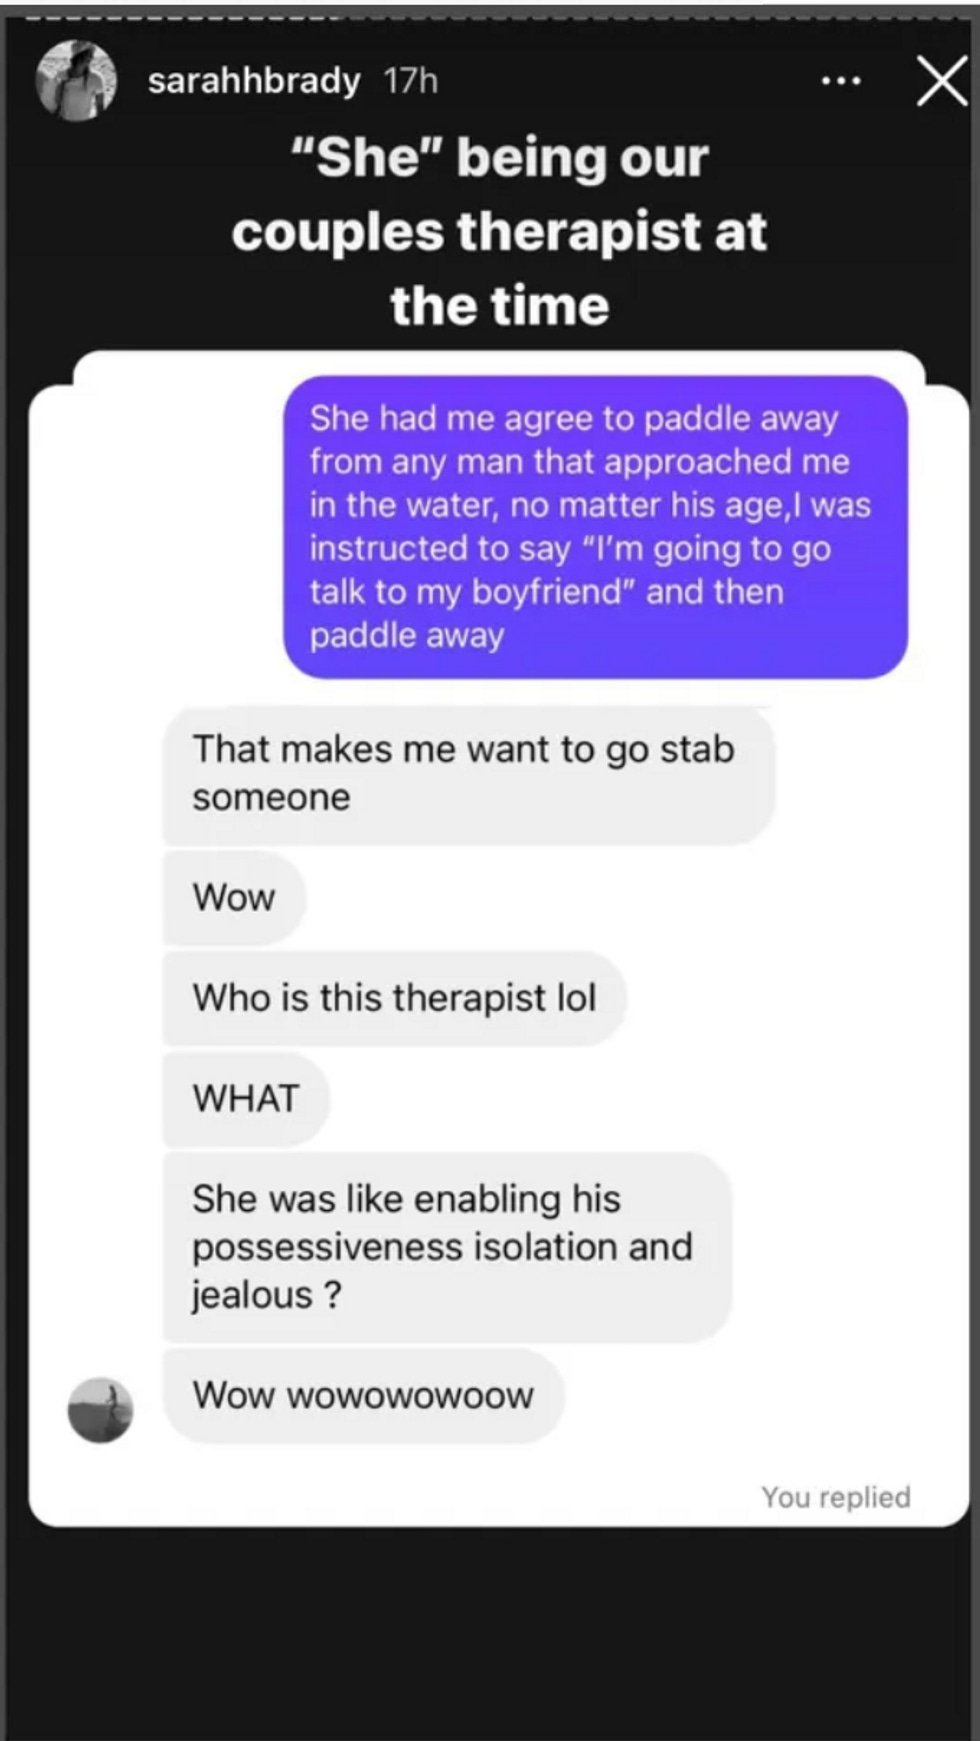 She had me agree to paddle away from any man that approached me in the water, no matter his age, i was instructed to say "I'm going to go talk to my boyfriend" and then paddle away That makes me want to go stab someone Wow Who is this therapist lol WHAT She was like enabling his possessiveness isolation and jealous? Wow wowowowoow